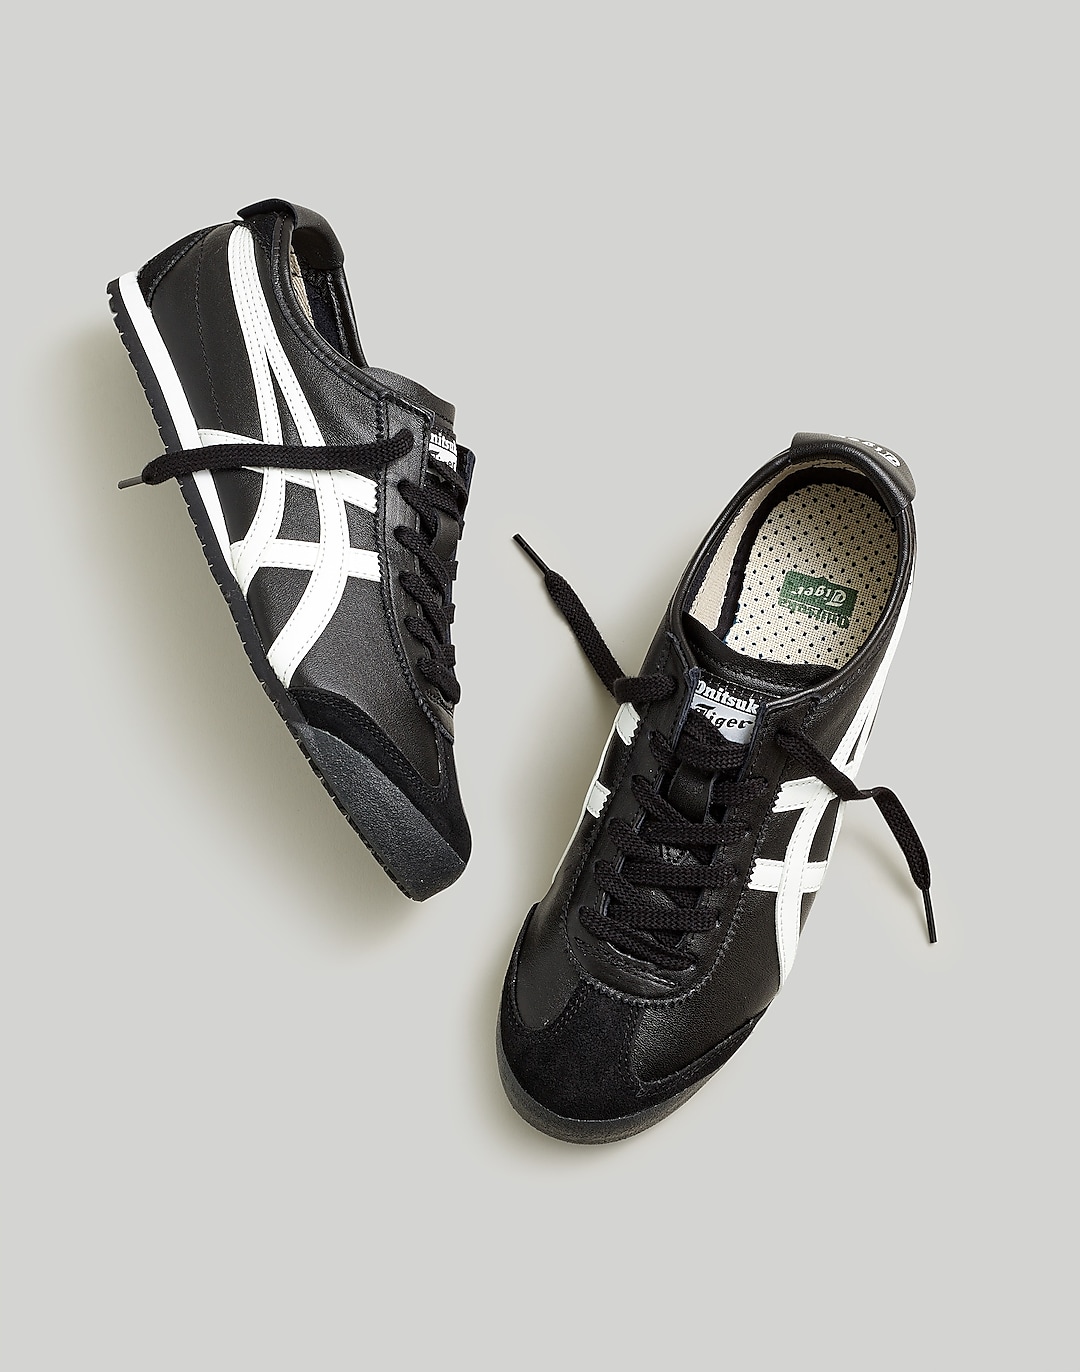 Onitsuka Tiger™ Unisex Mexico 66 Sneakers | Madewell